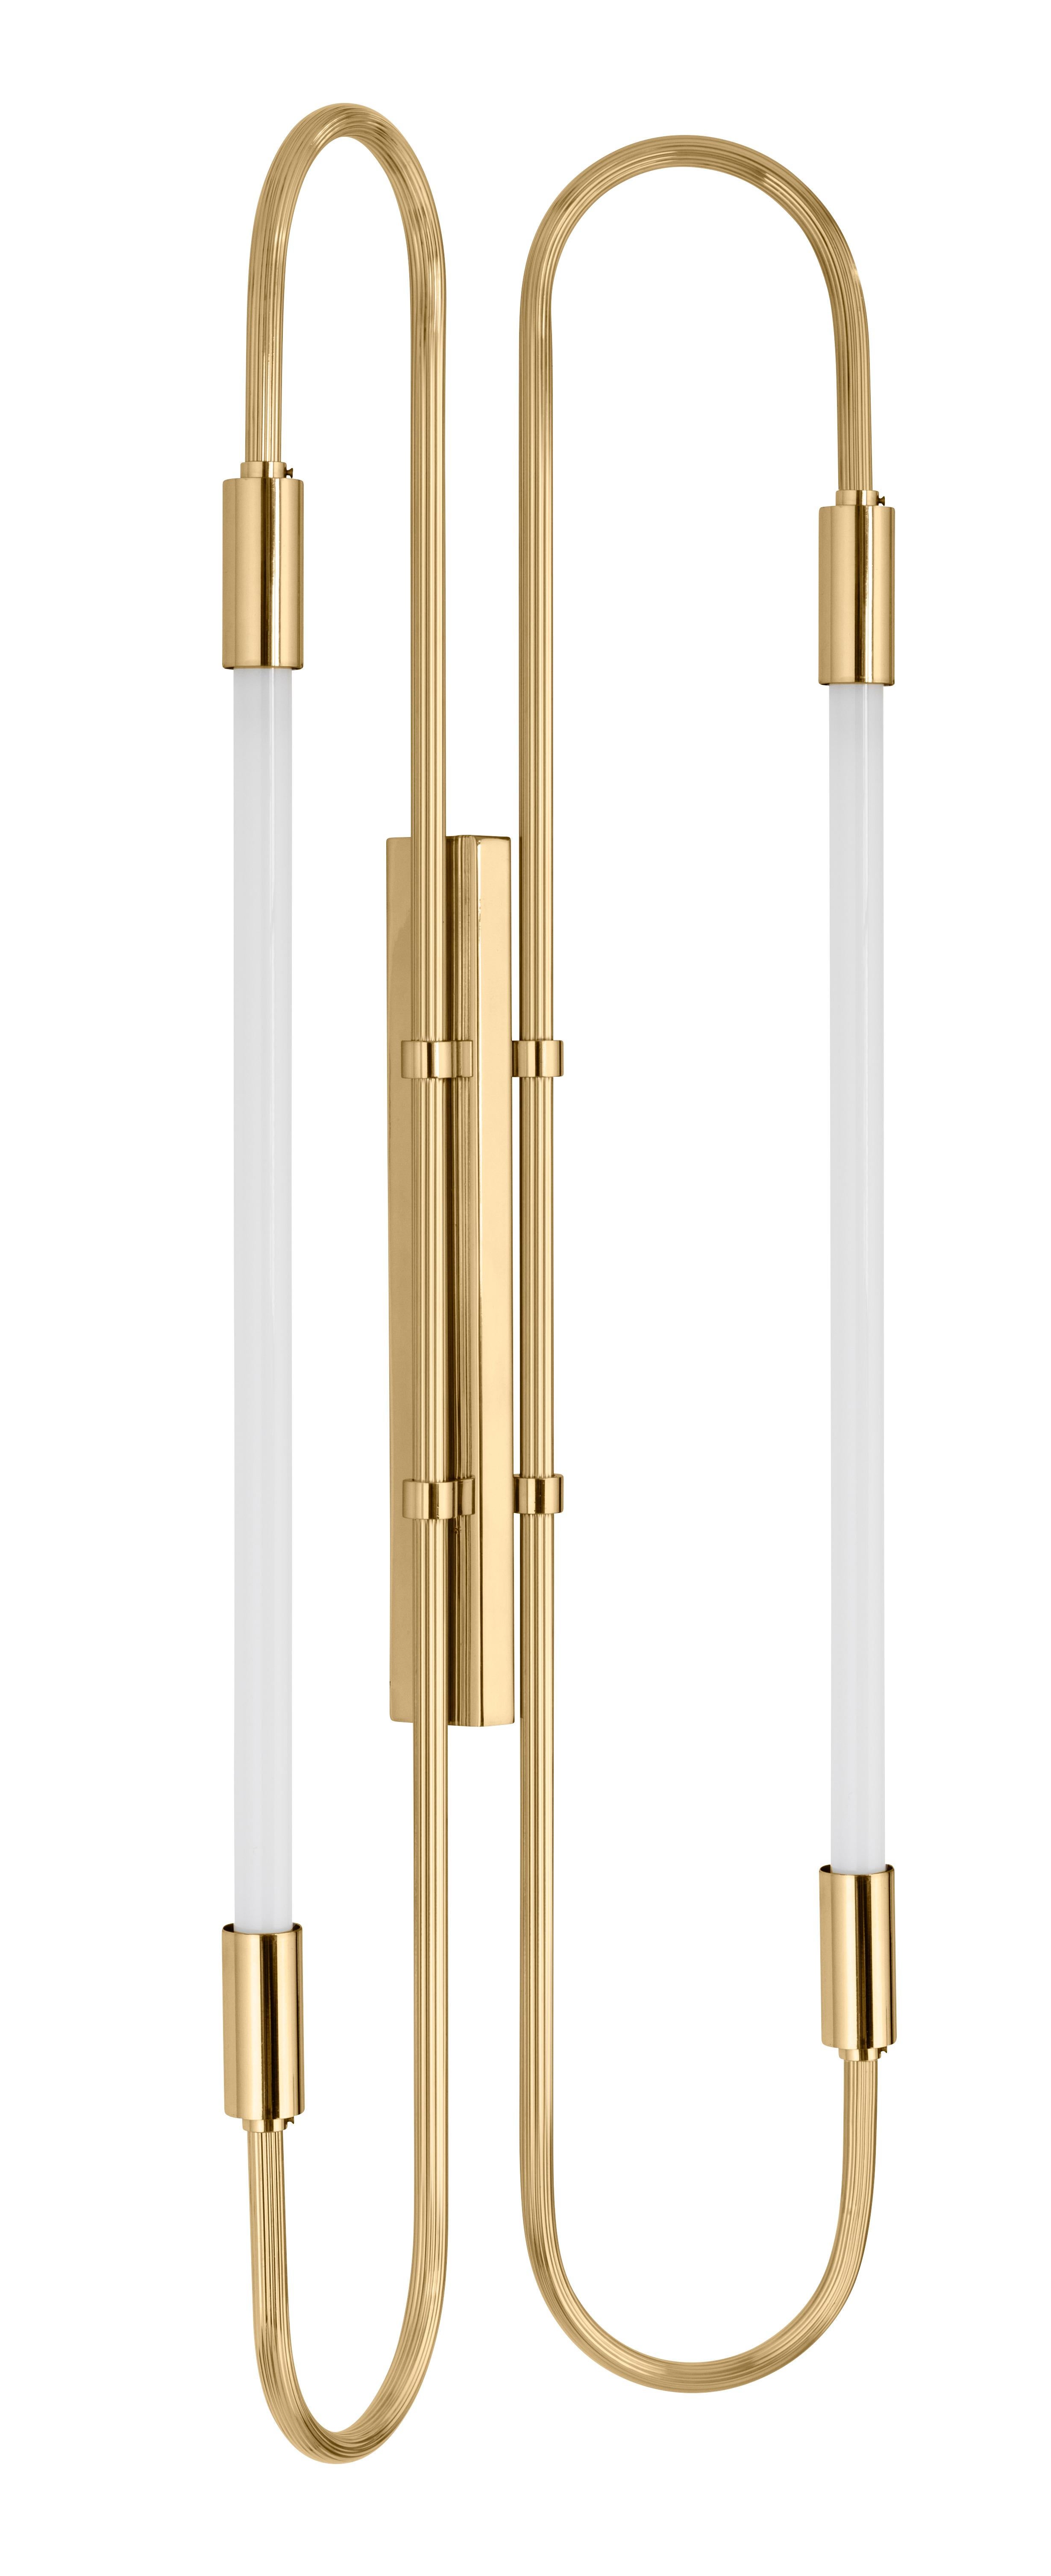 Wall Lamp Neon Double 103 by Magic Circus Editions
Dimensions: H. 103 cm, W. 37 cm, D. 11 cm, 3.6 kg.
Materials: Fluted brass tube and glass.
Available Finishes: brass (lacquered polished brass, unlacquered polished brass, brushed brass) or nickel